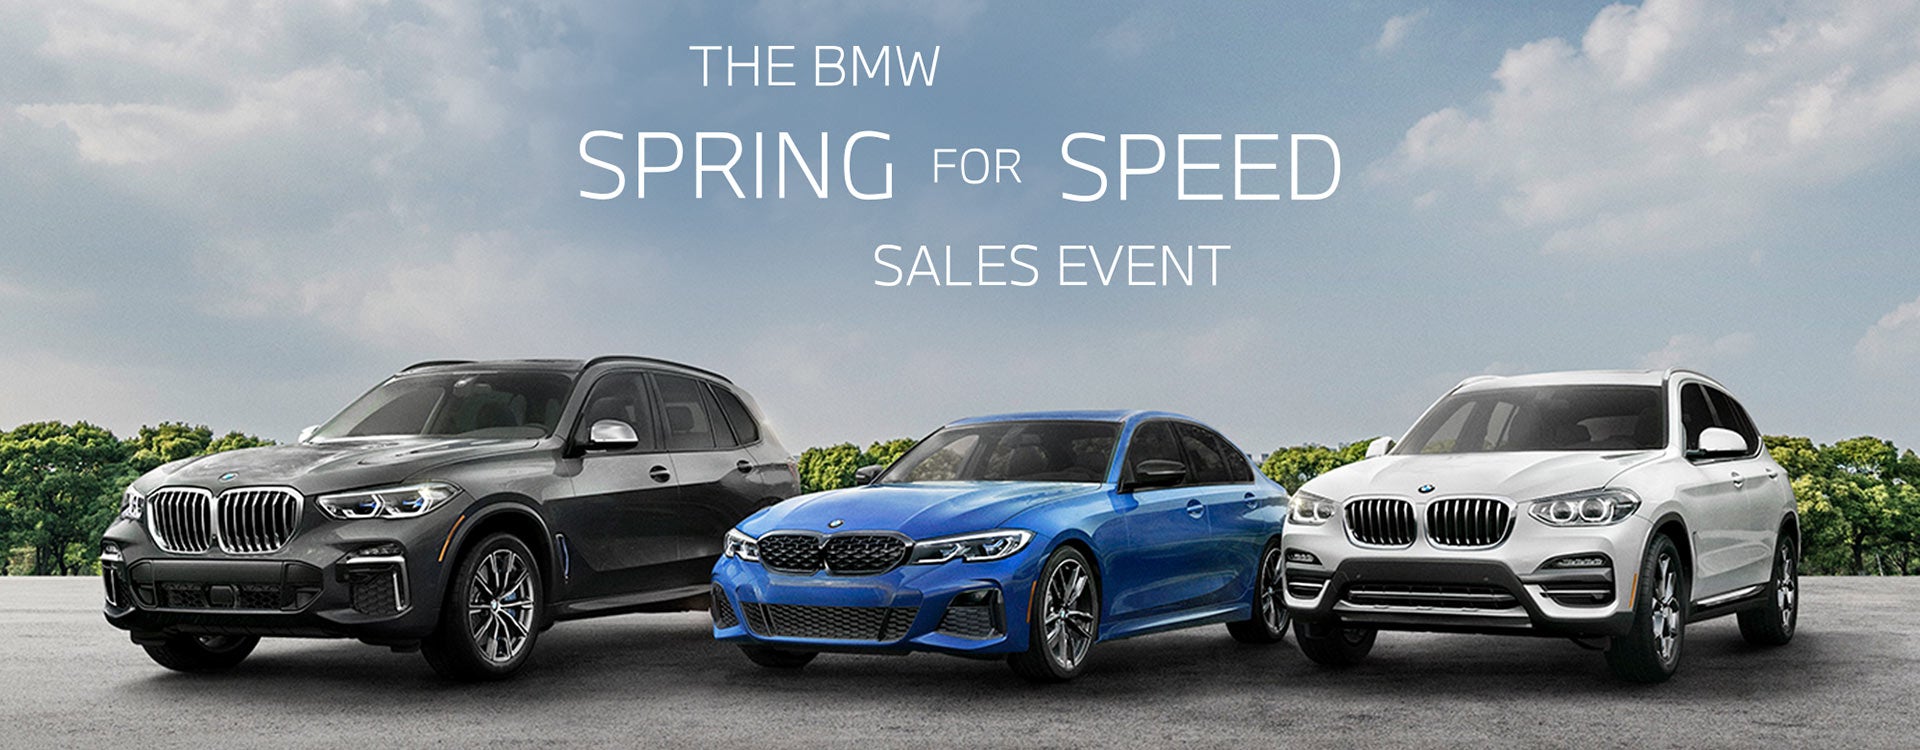 Spring For Speed Sales Event | BMW of Madison in Madison WI